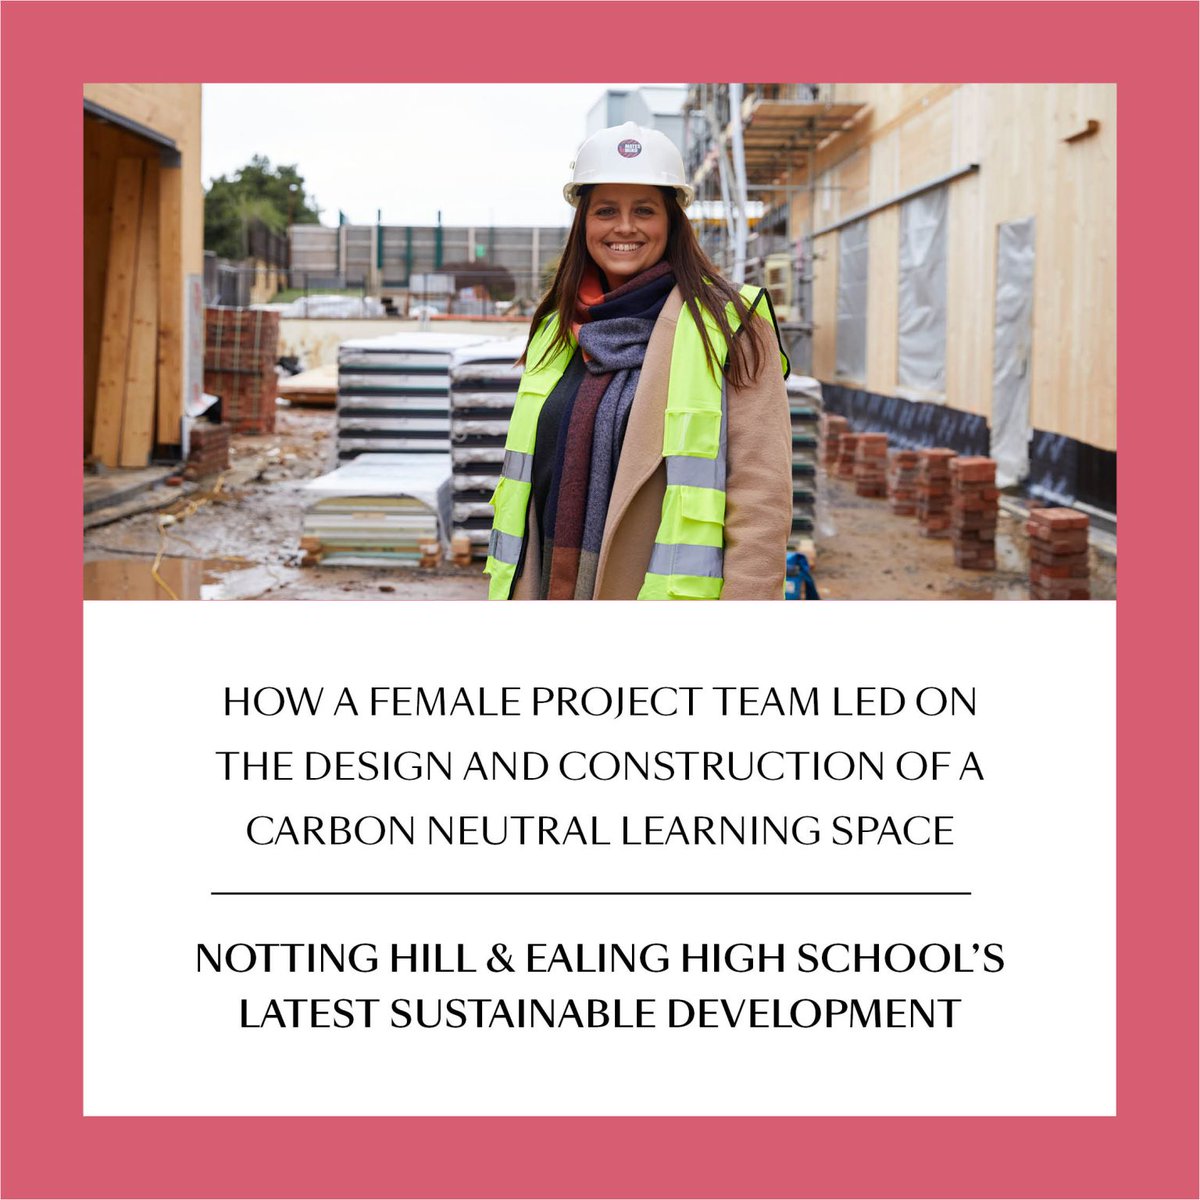 Alumna Spotlight 🌟 Meet Laura Lincoln, a passionate advocate for STEM careers, especially for girls in Construction and Project Management. 🏗️🌱 Her work is shaping the future of education and empowering more women in #STEM! 💪 #gdstalumnae #fearnothing ow.ly/ComE50R9iEH